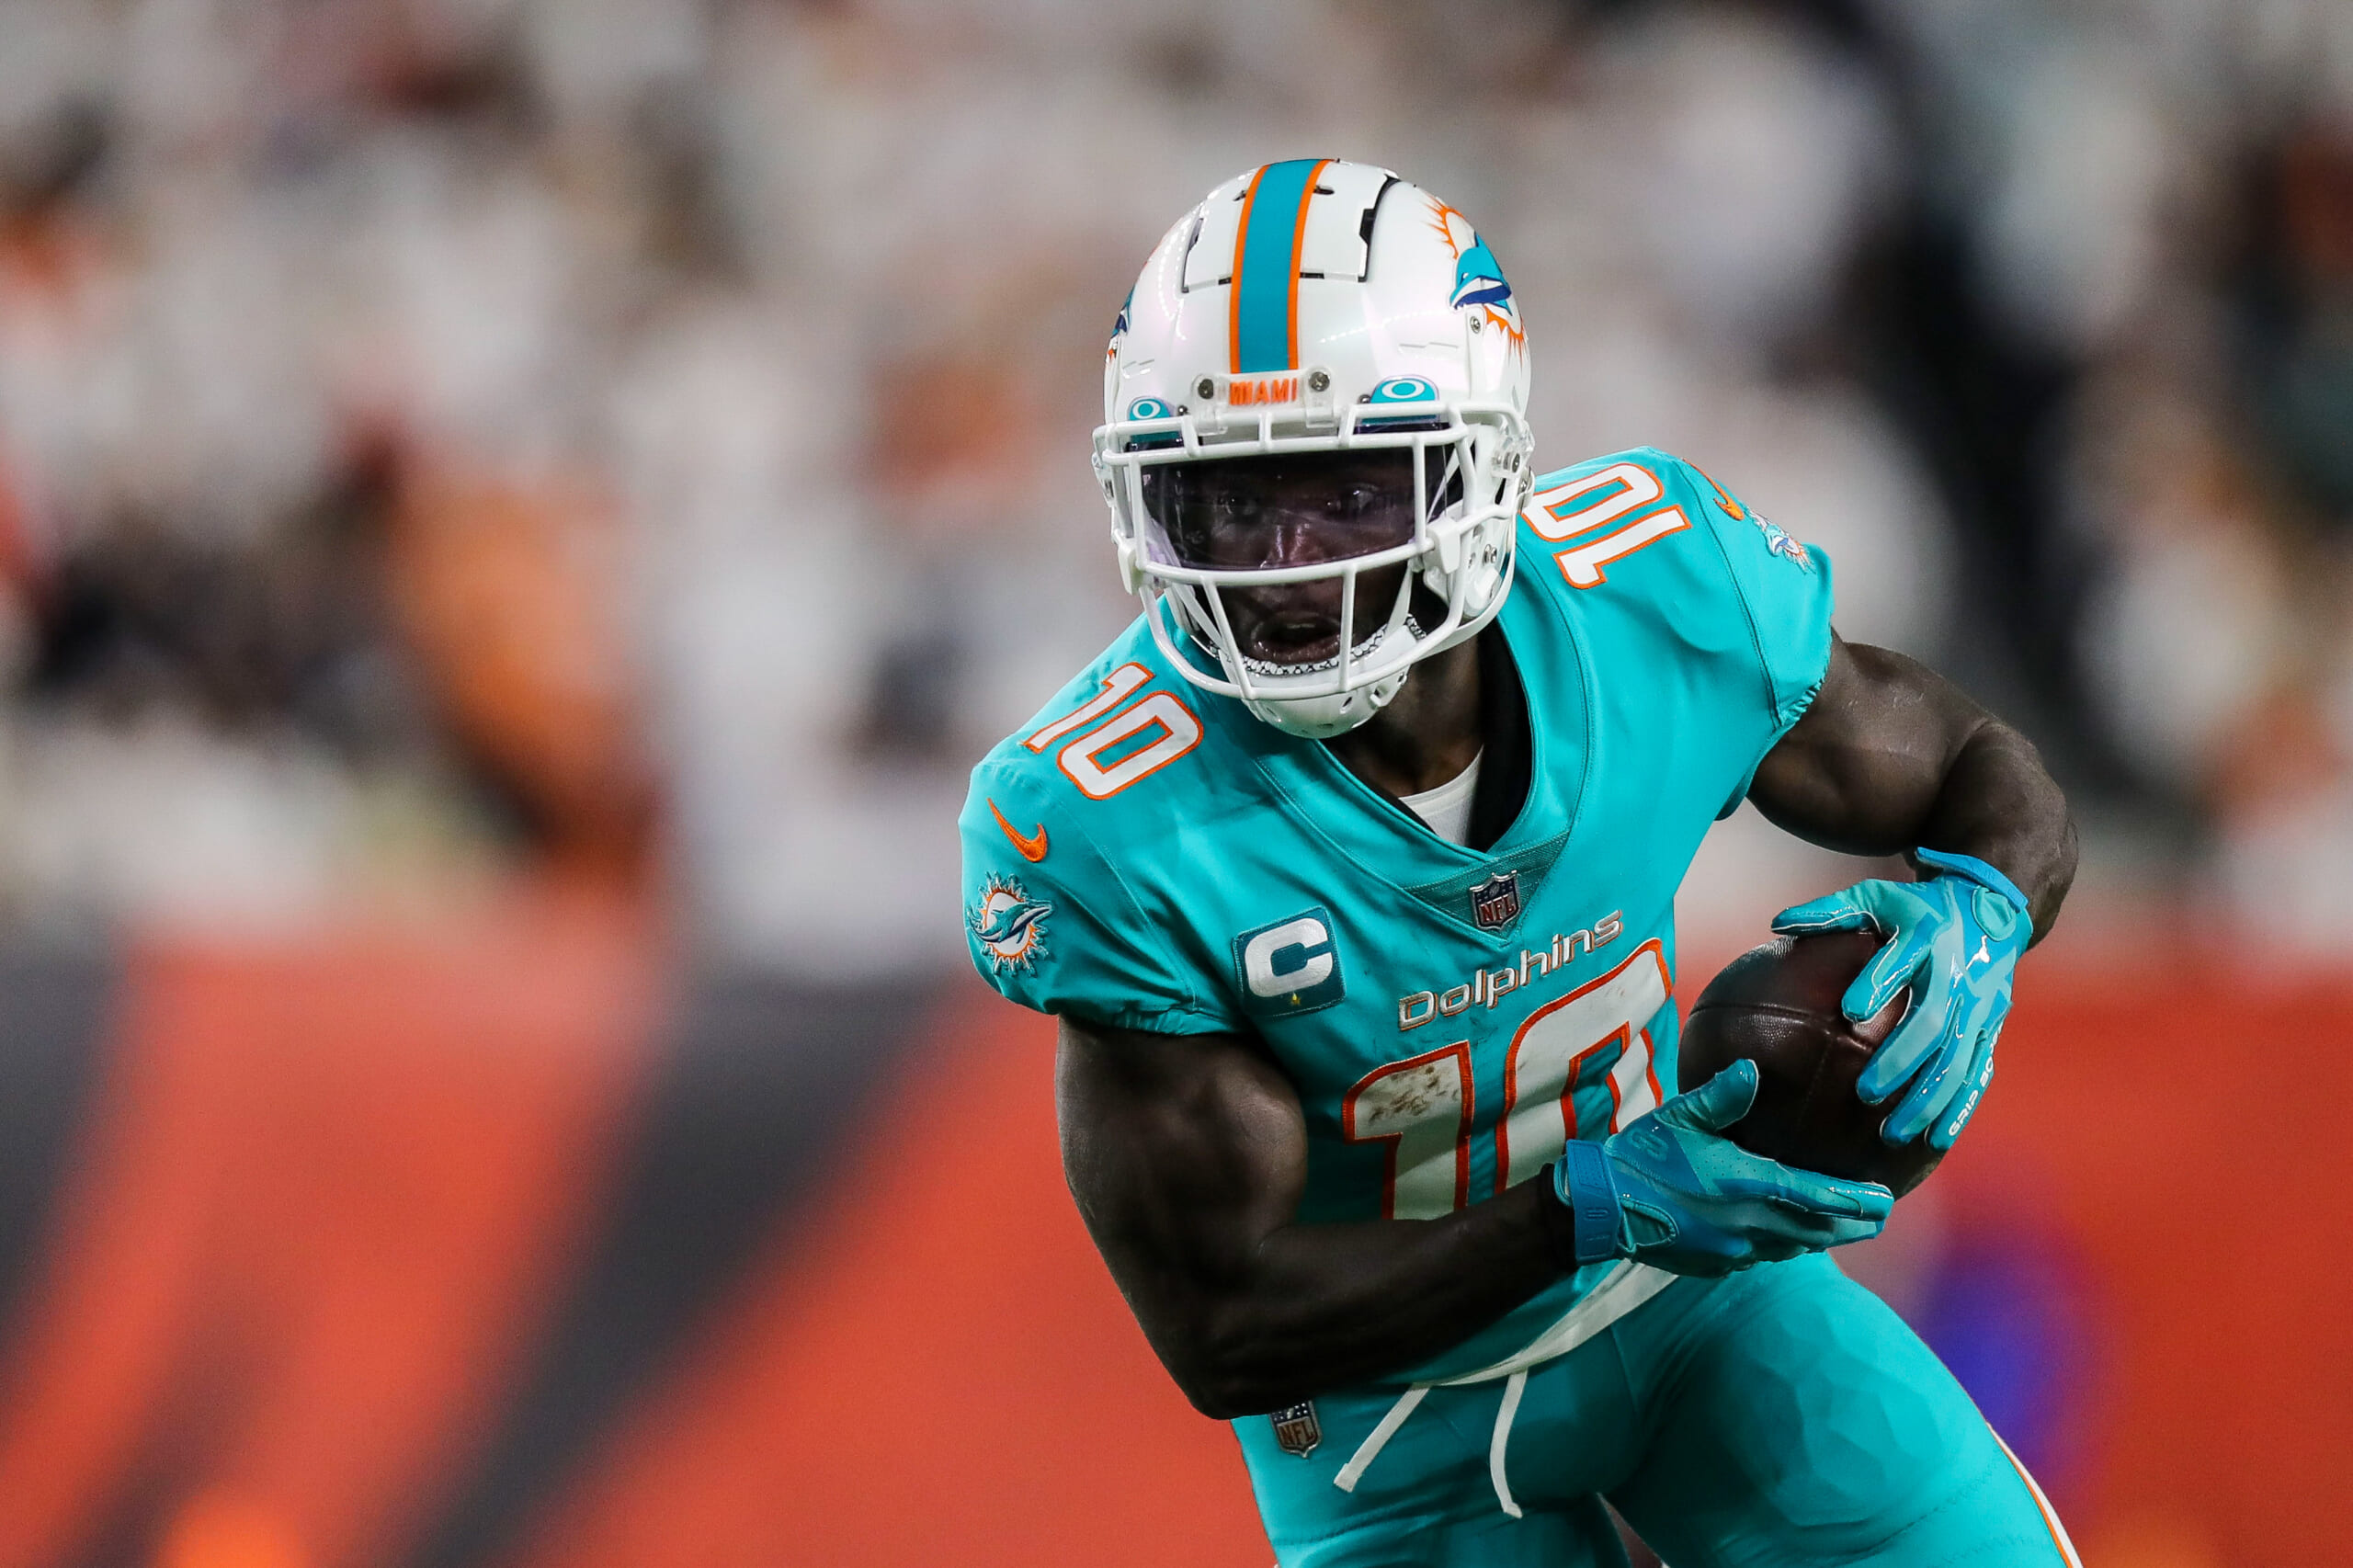 Miami Dolphins star Tyreek Hill in walking boot after suffering foot injury